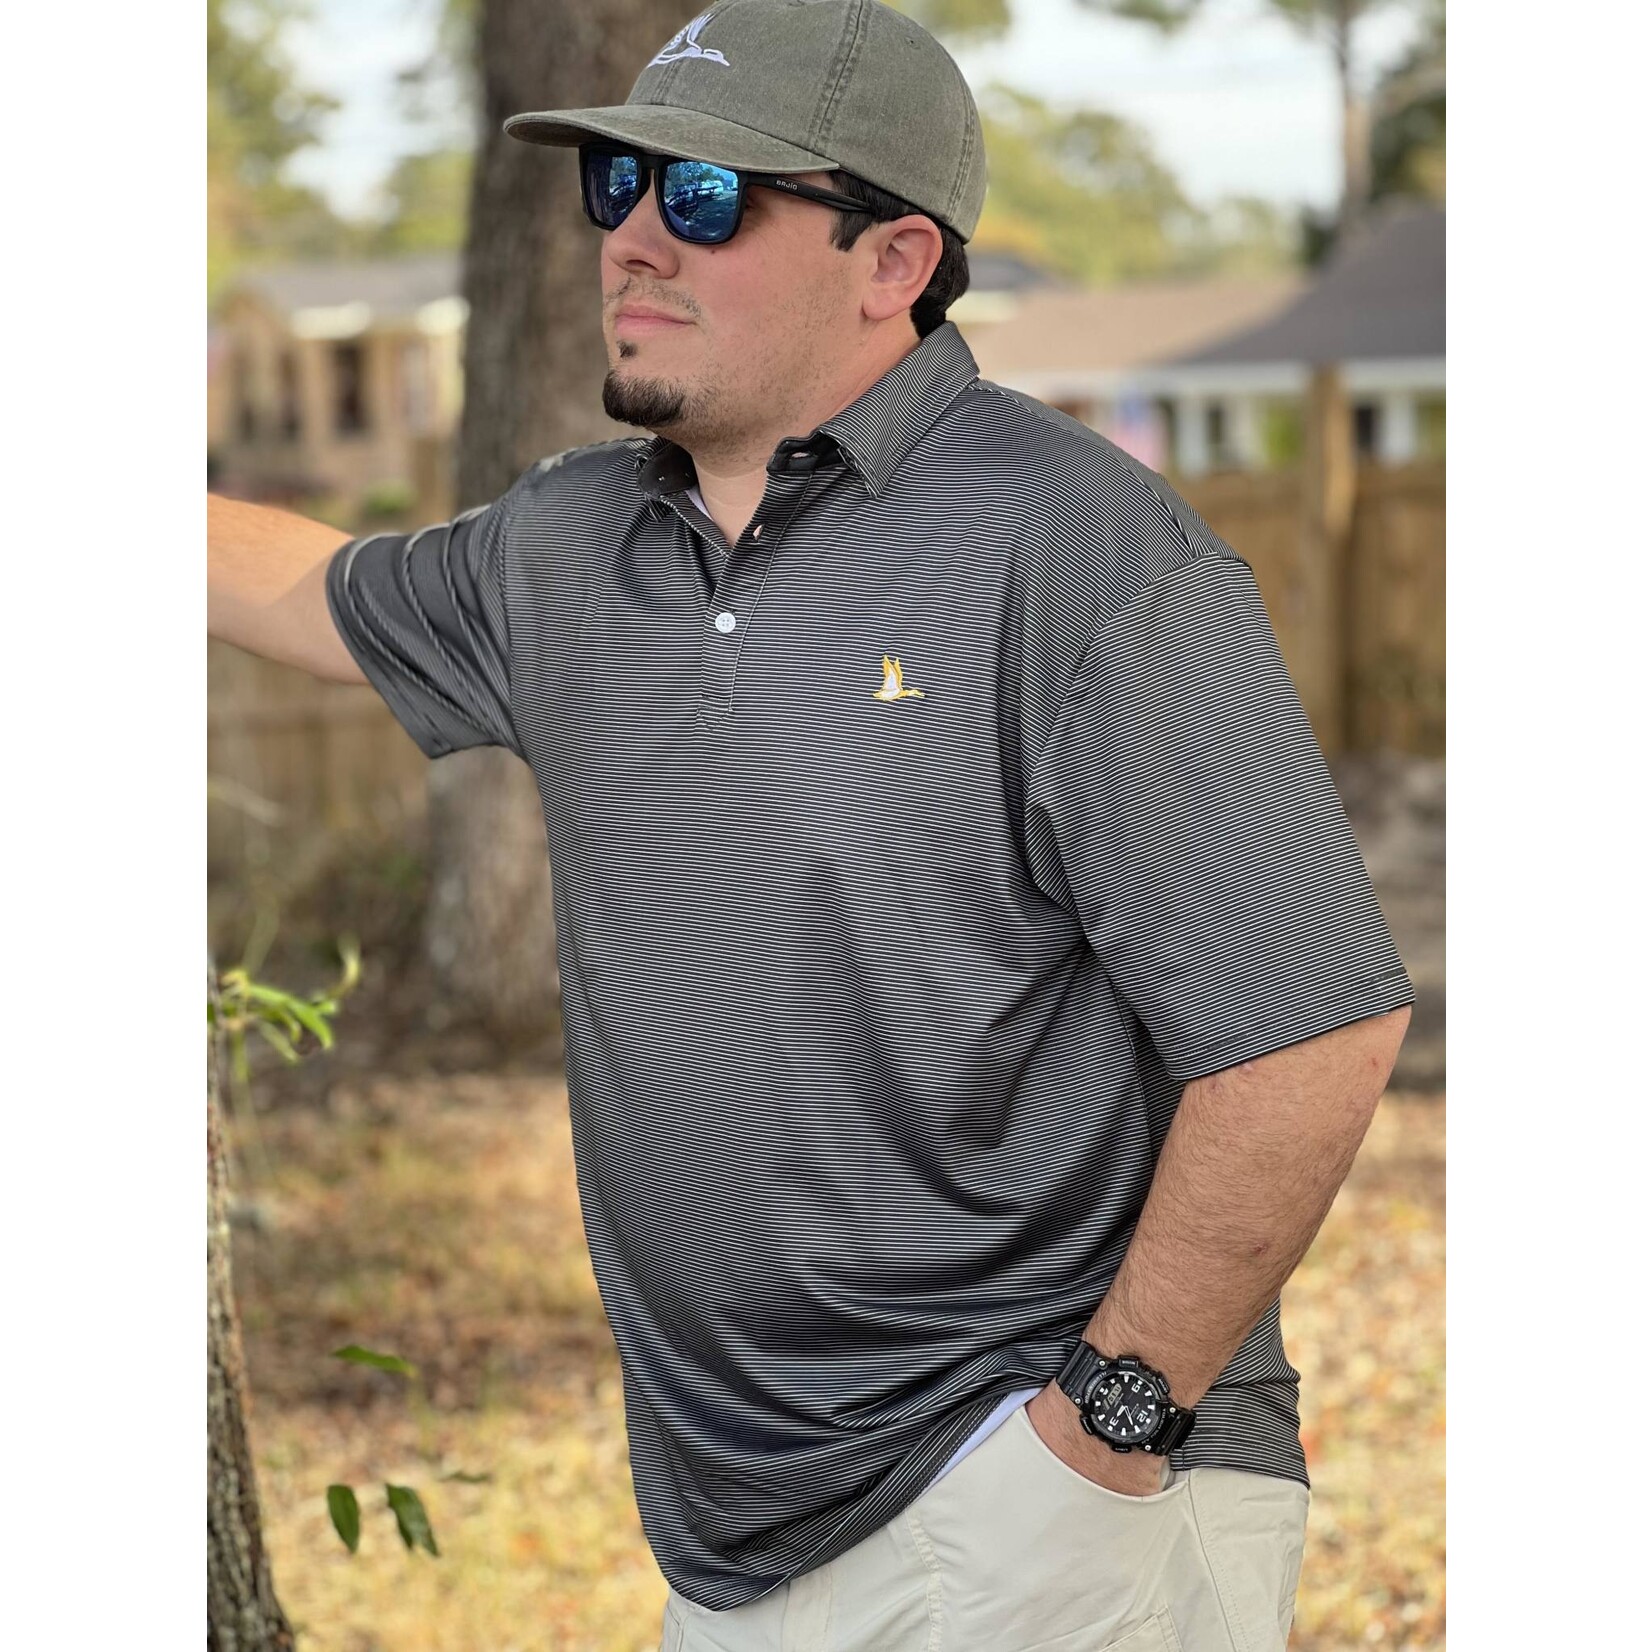 Roost Waterfowl Roost Waterfowl Men's Polo Shirt